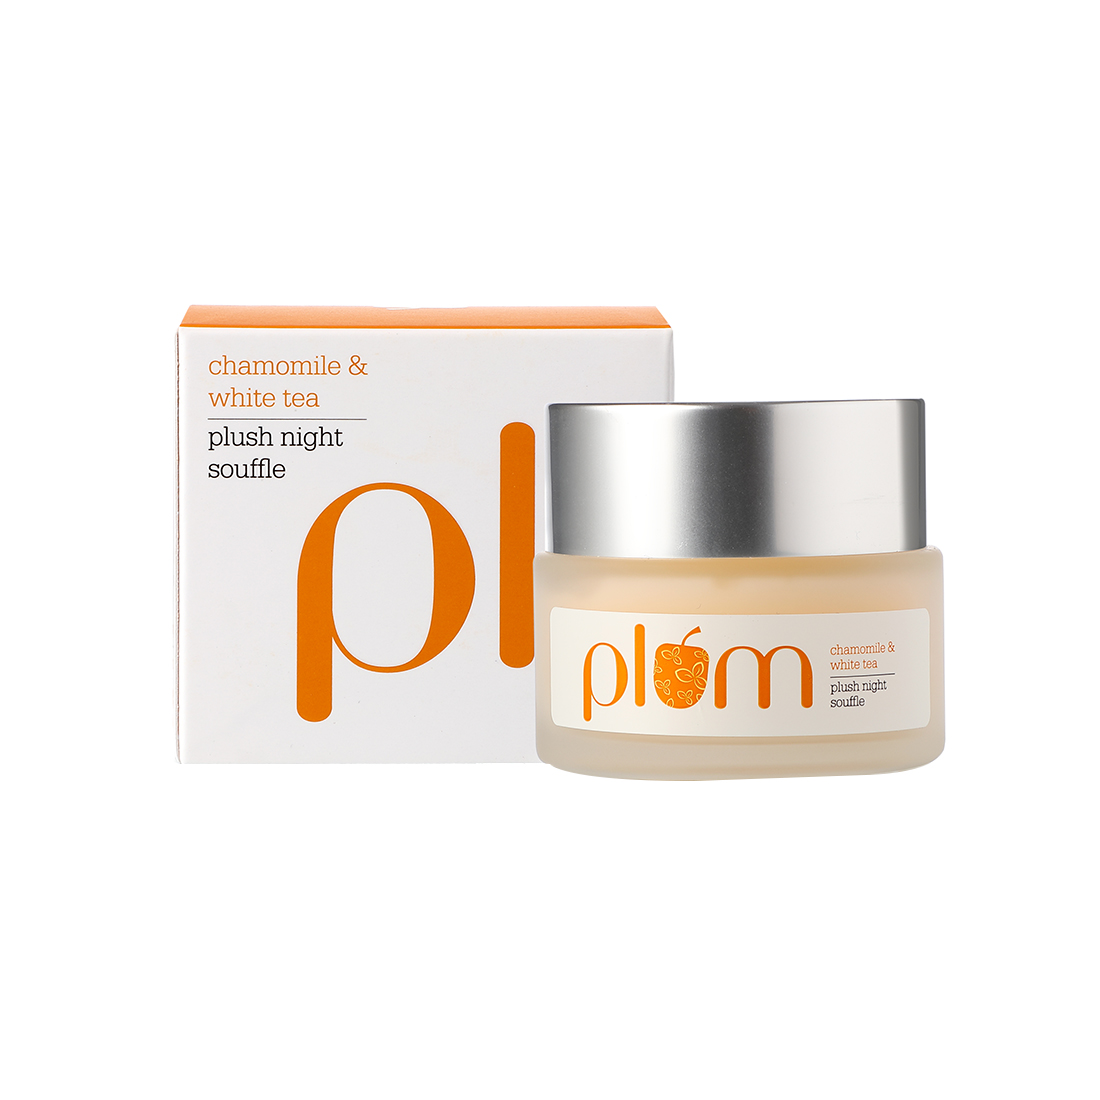 Winter Essentials From Plum For Well-Nourished Skin